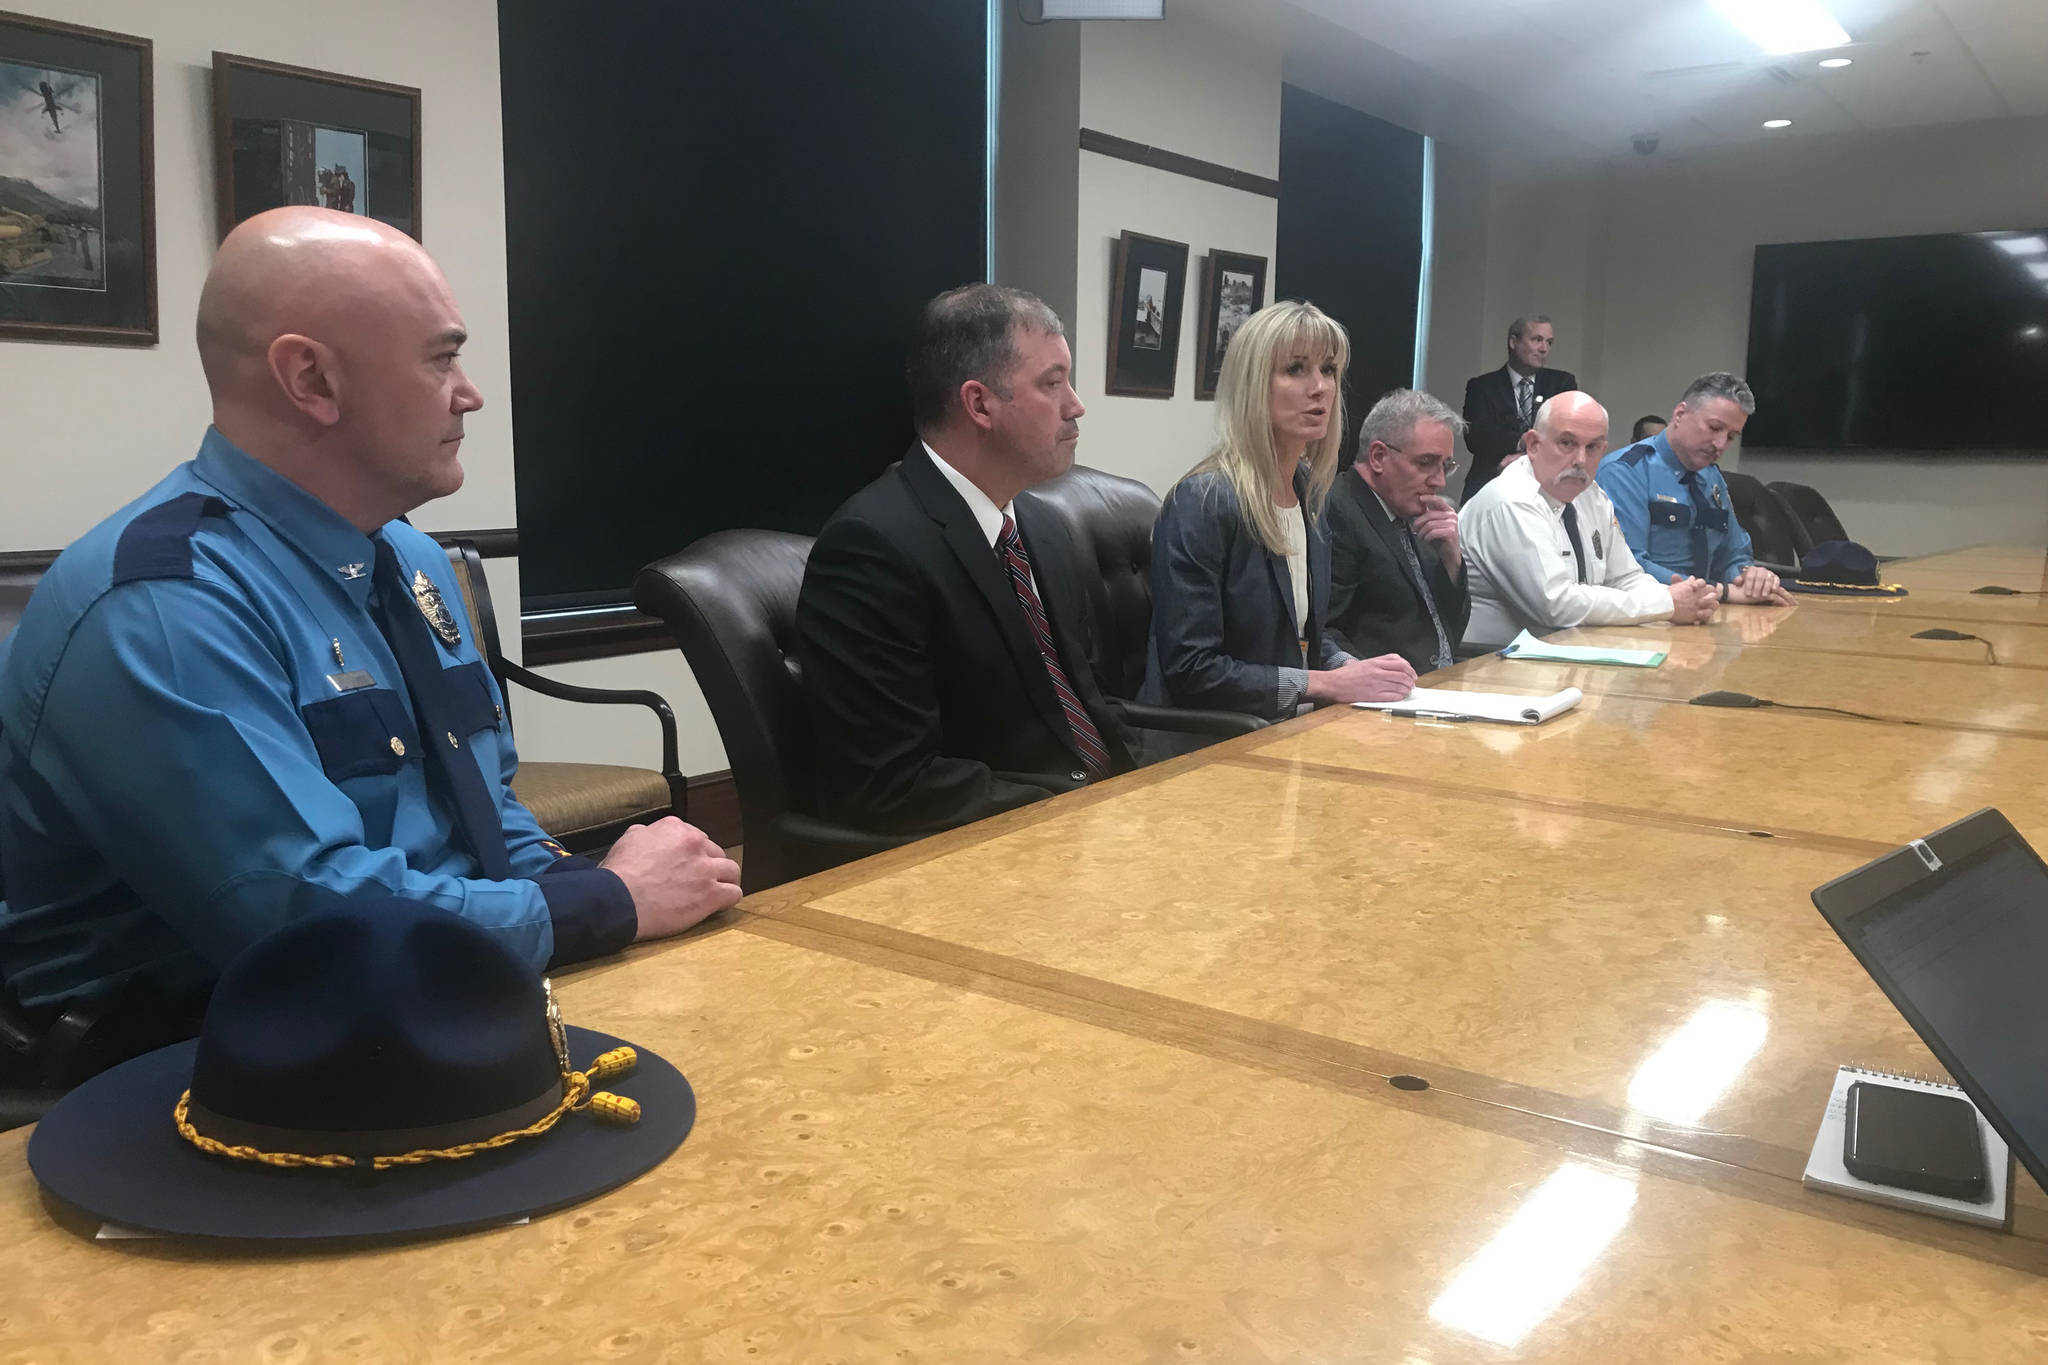 Department of Public Safety Commissioner designee Amanda Price (center) appears with her staff at the Alaska State Capitol on Tuesday, April 16, 2019. (Alex McCarthy | Juneau Empire)